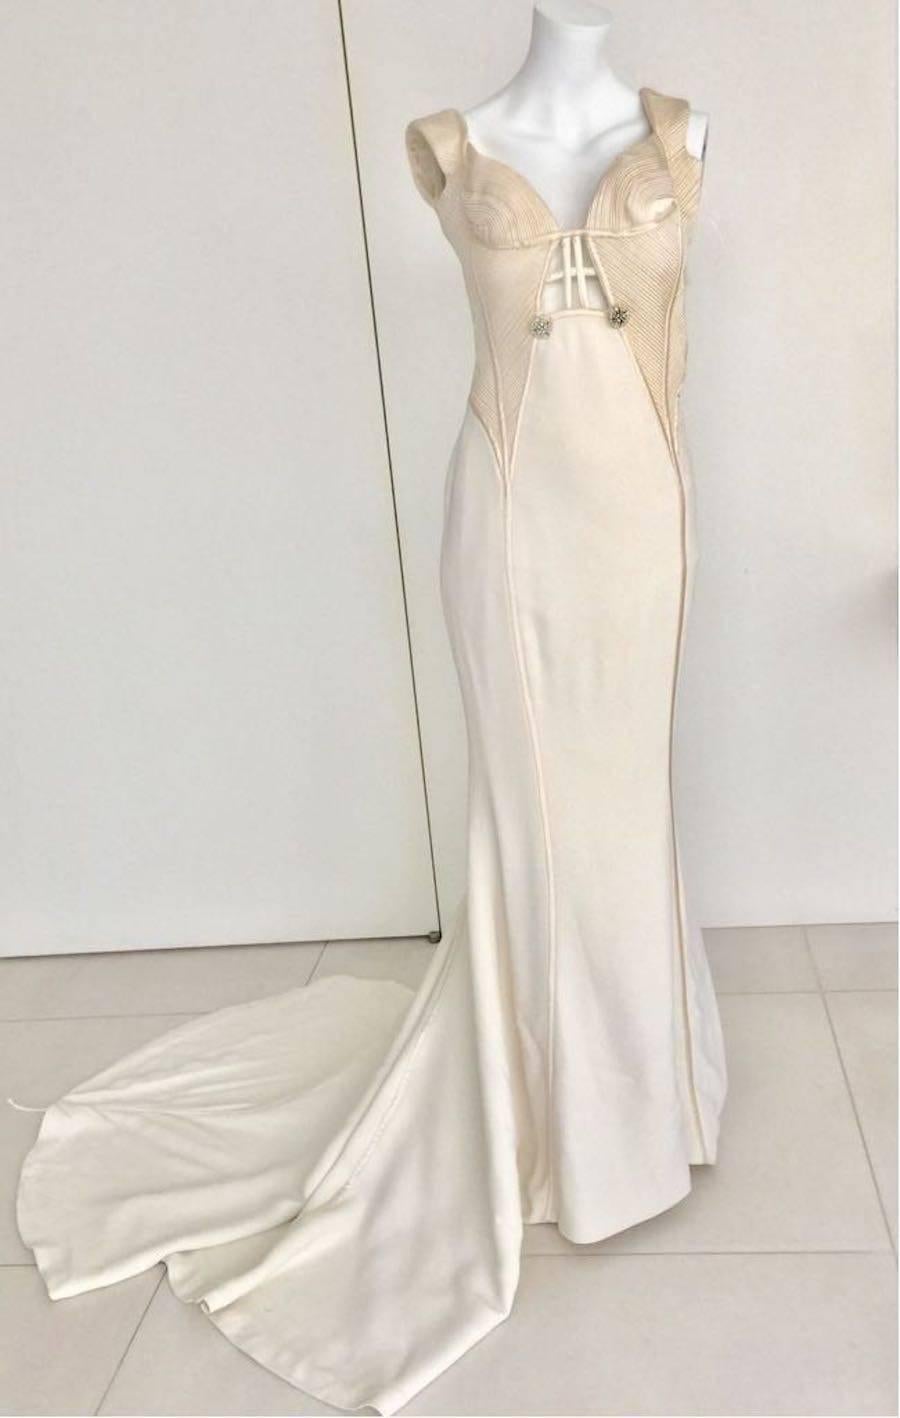 Atelier Versace one off piece created and designed by Gianni Versace in 1994 as evening dress and tailor made as wedding dress thanks to addition of stunning bridal veil composed of diadems Christal jewelry. It is made of silk with satin.
Coming